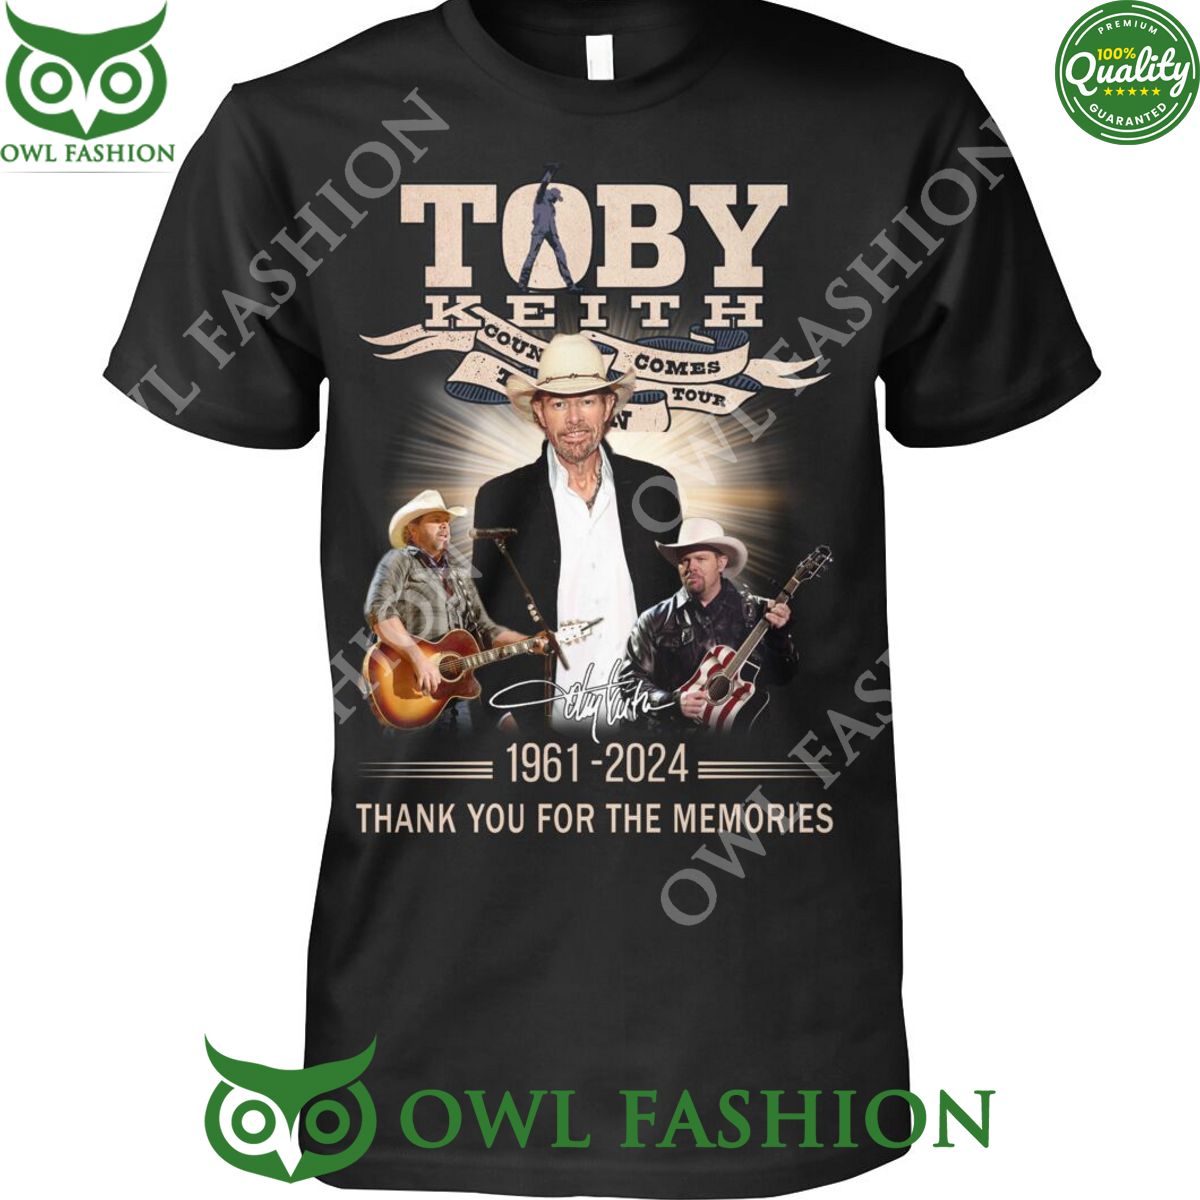 american country music toby keith 1961 2024 thanks for memories t shirt 1 pbSRy.jpg